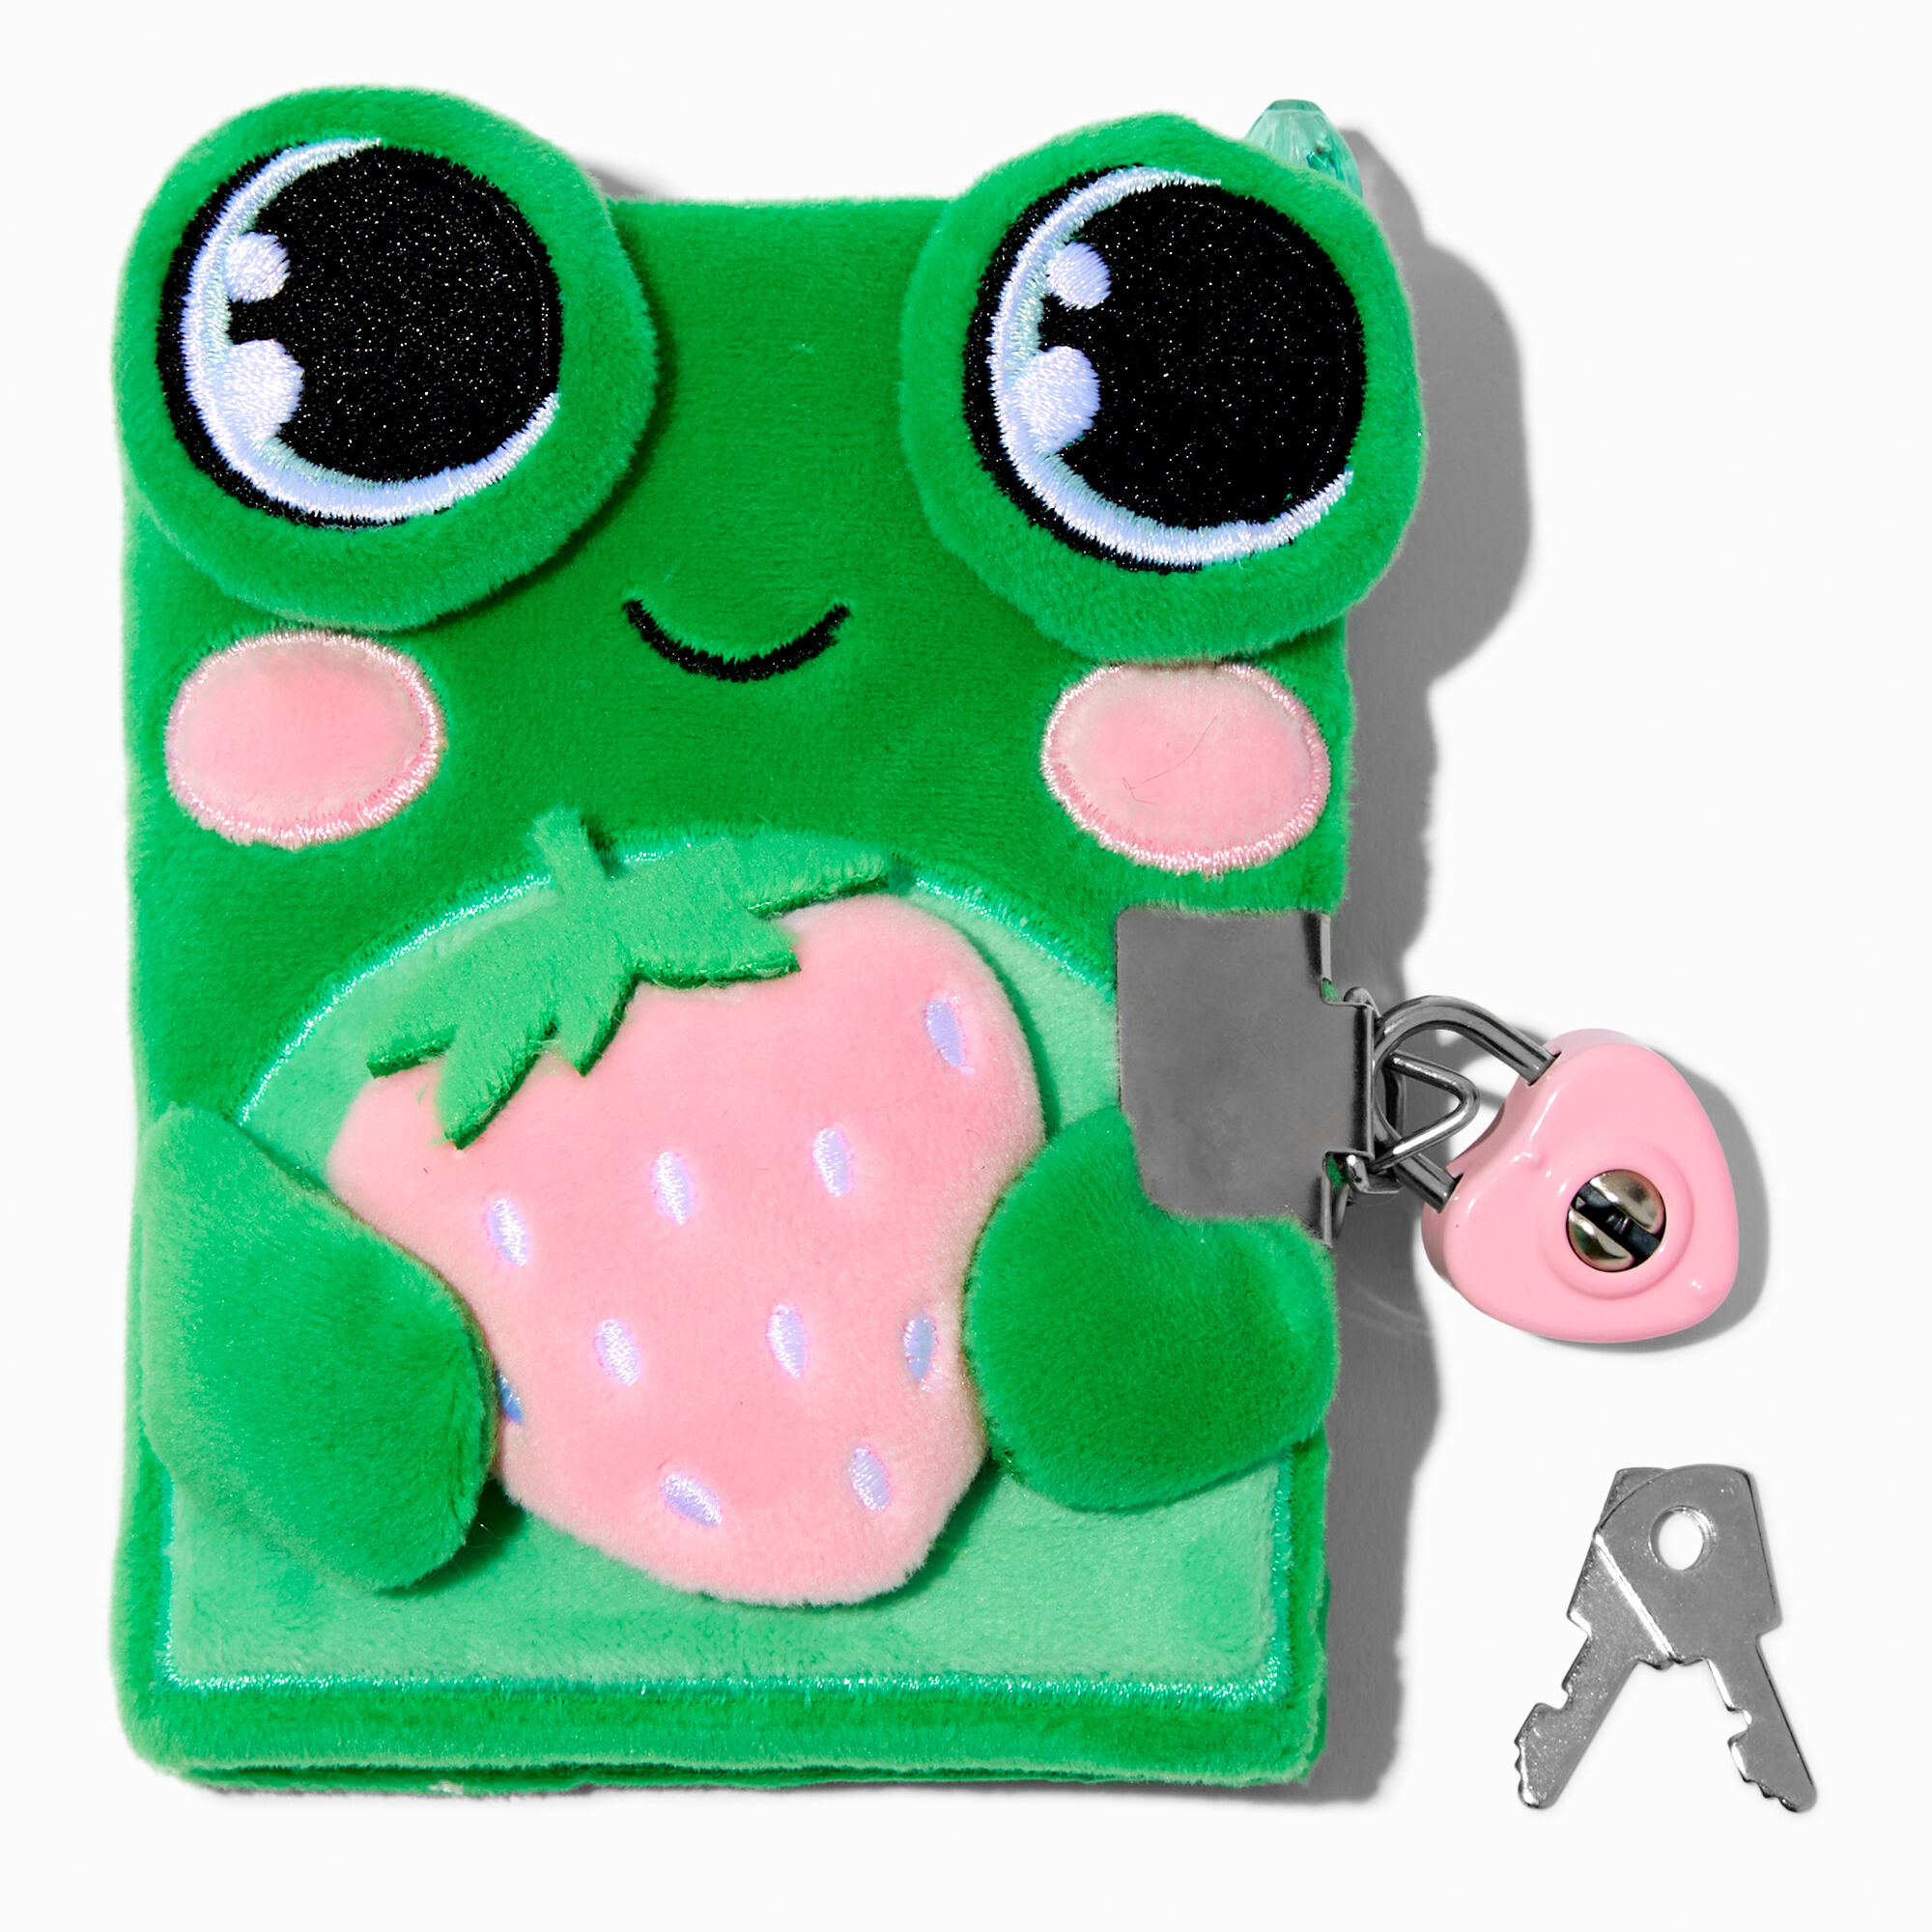 View Claires Club Strawberry Frog Plush Lock Diary information